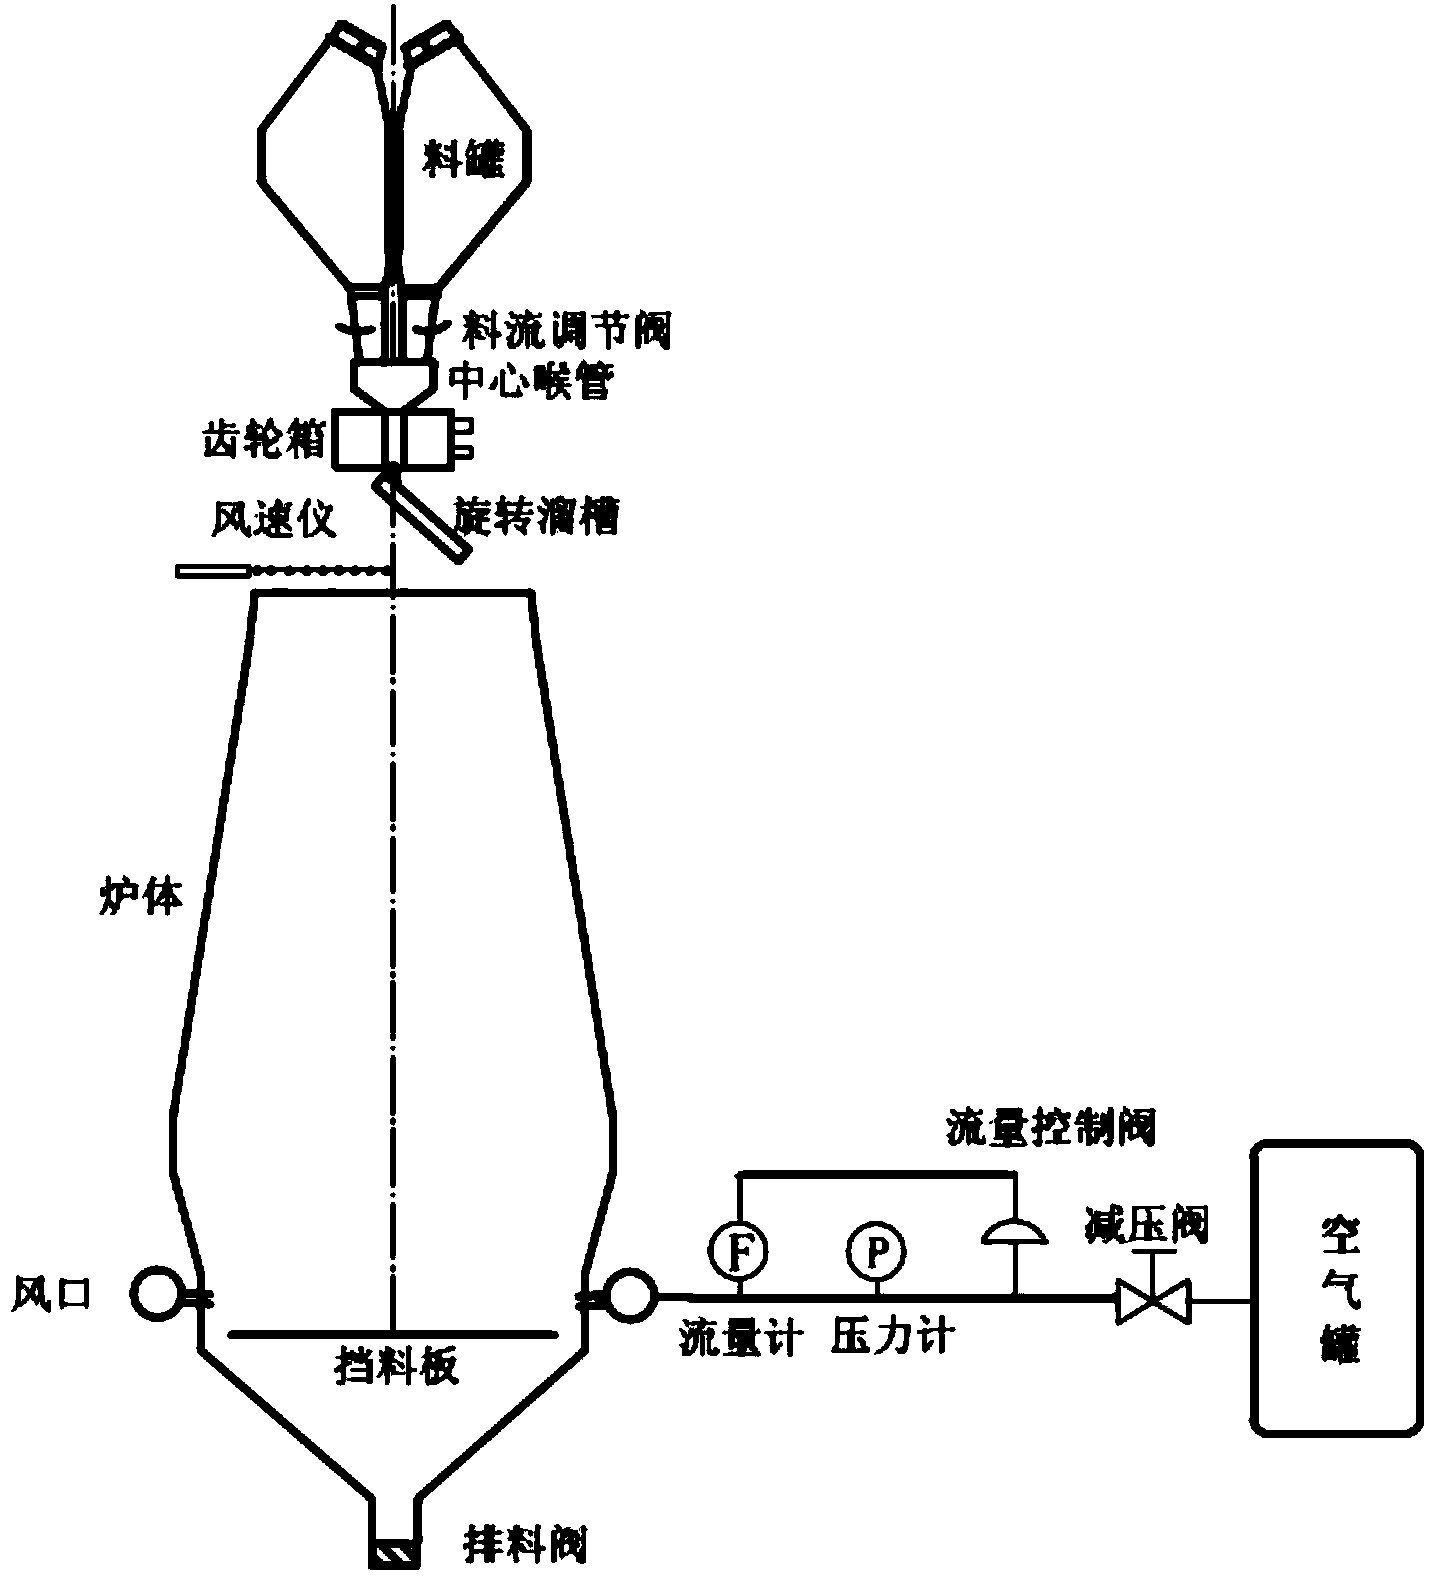 Bell-less material distributing method capable of ensuring stable running of blast furnace